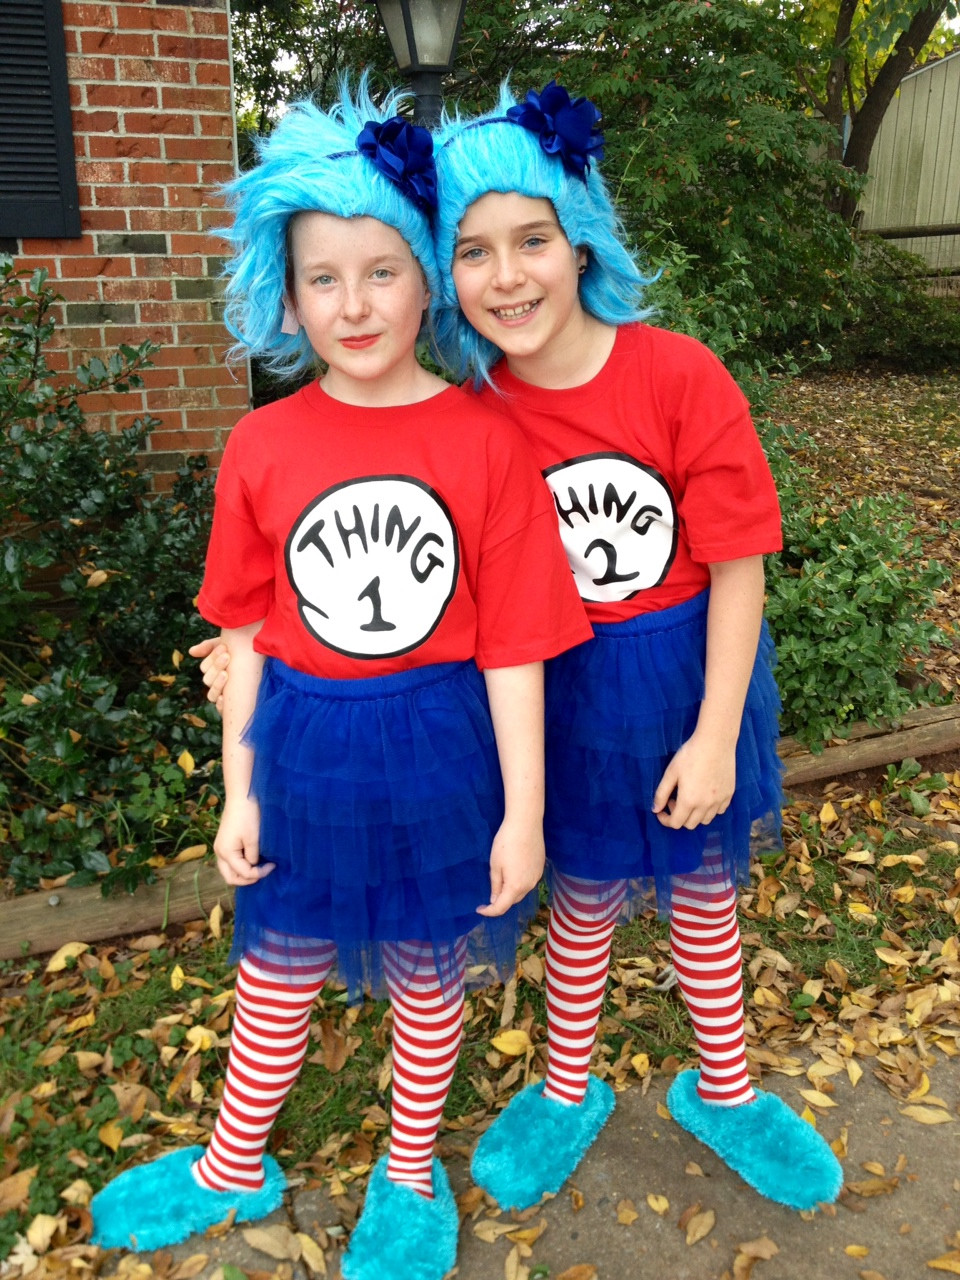 11+ Thing 1 costume diy ideas in 2022 